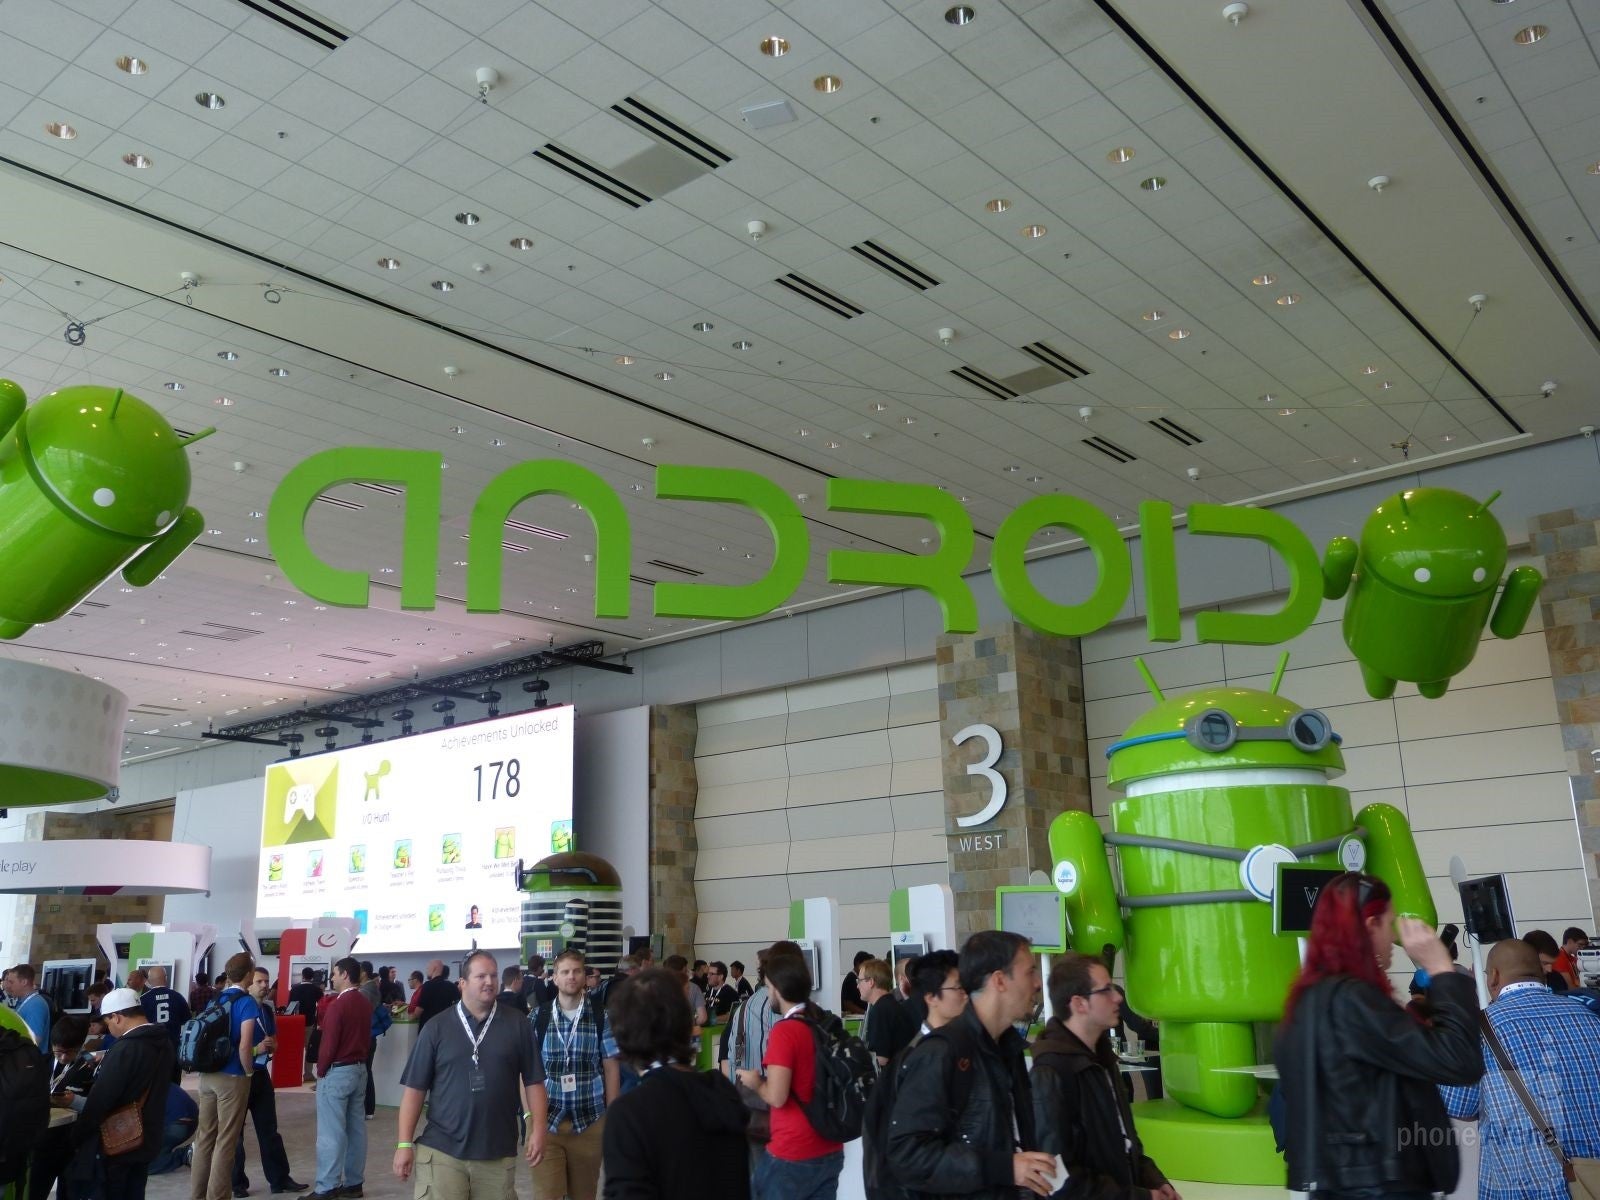 Android will dominate the festivities just like last year, though we see added items related to Android Wear and Google Glass - Google unveils schedule for Google I/O, cloud, camera, wearables, and Android, and some possible no shows?